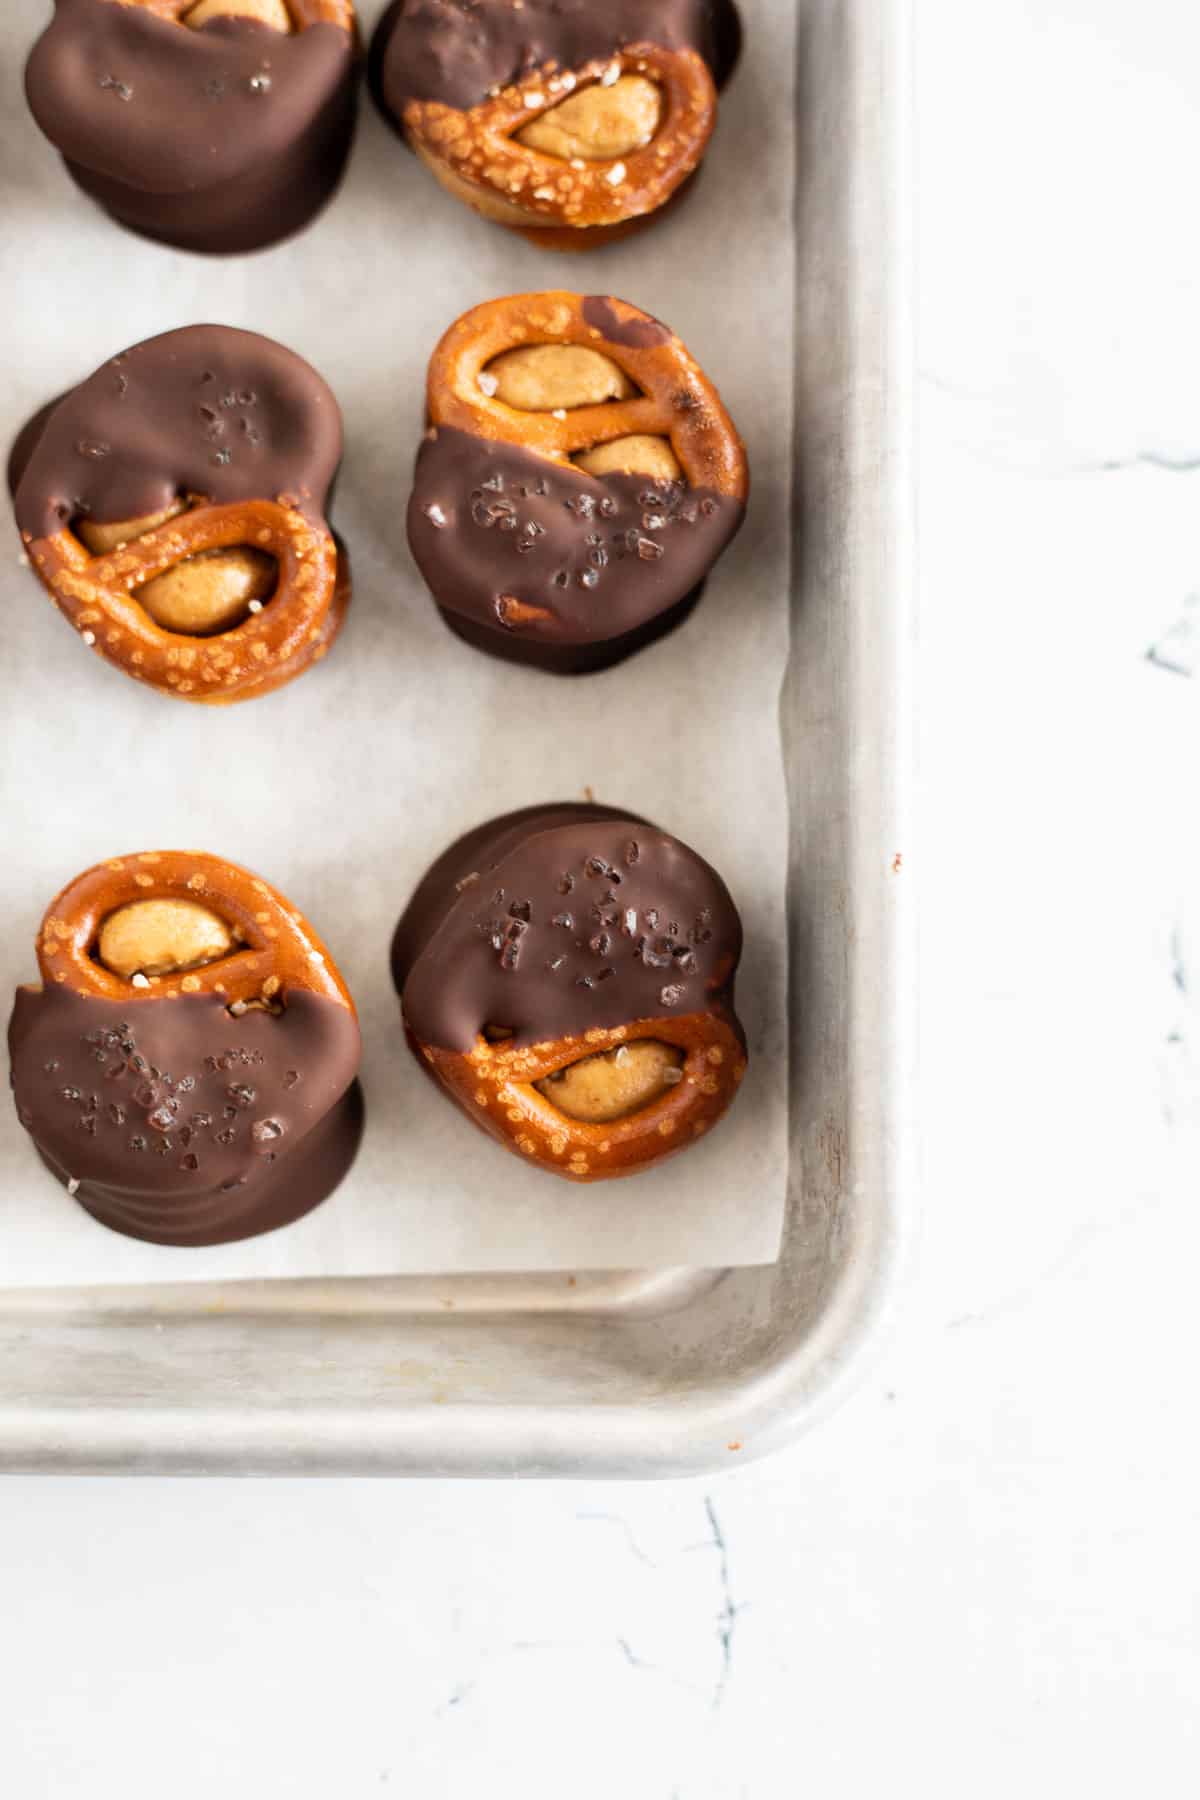 Peanut Butter Pretzel Bites with half dipped in chocolate on a parchment lined baking sheet.